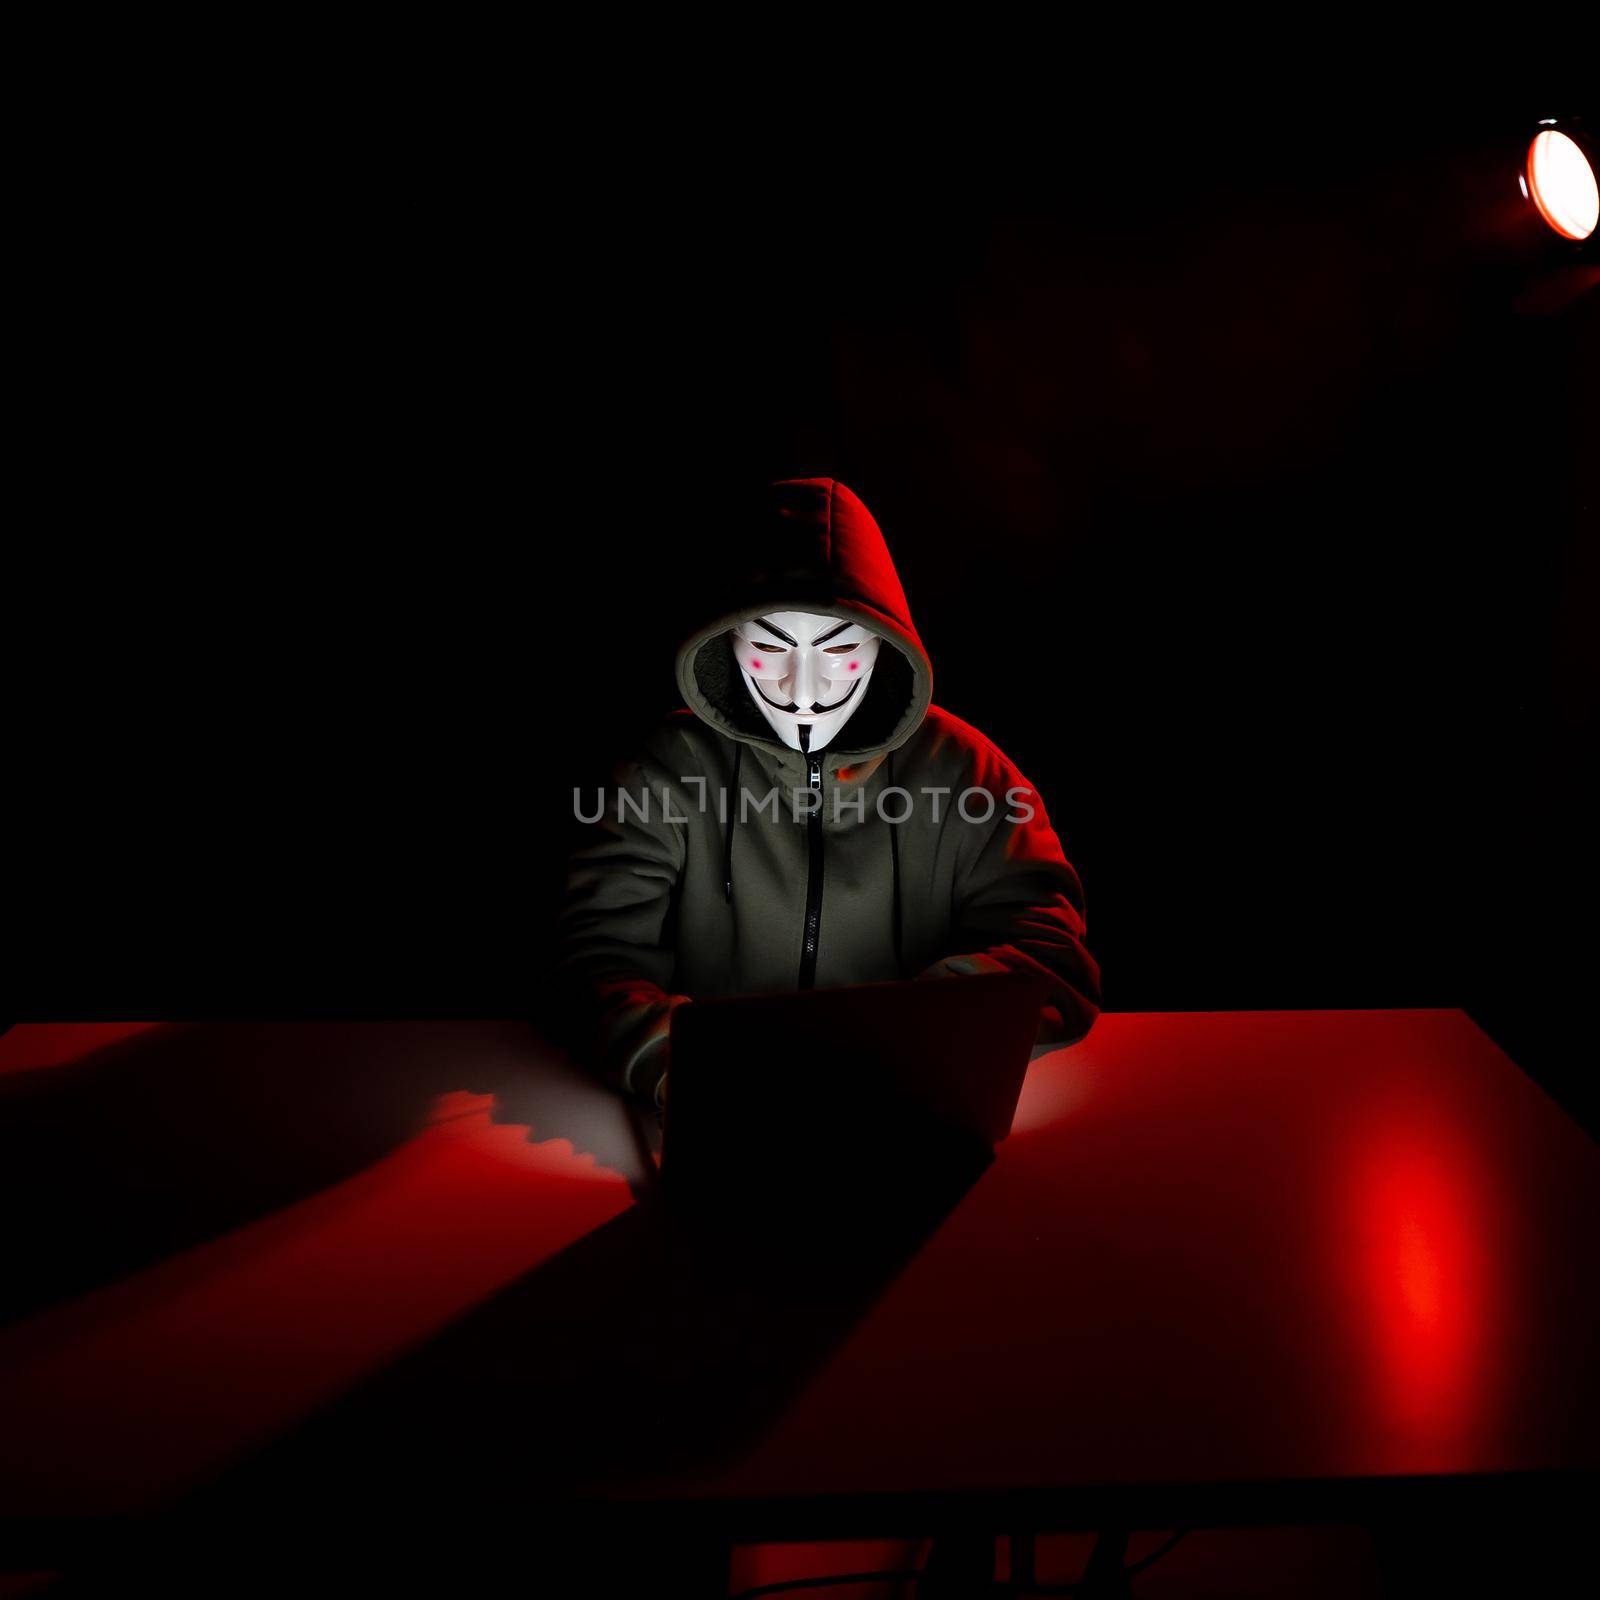 June 5, 2022 Novosibirsk, Russia: Anonymous in a hood is typing on a laptop in the dark in red light